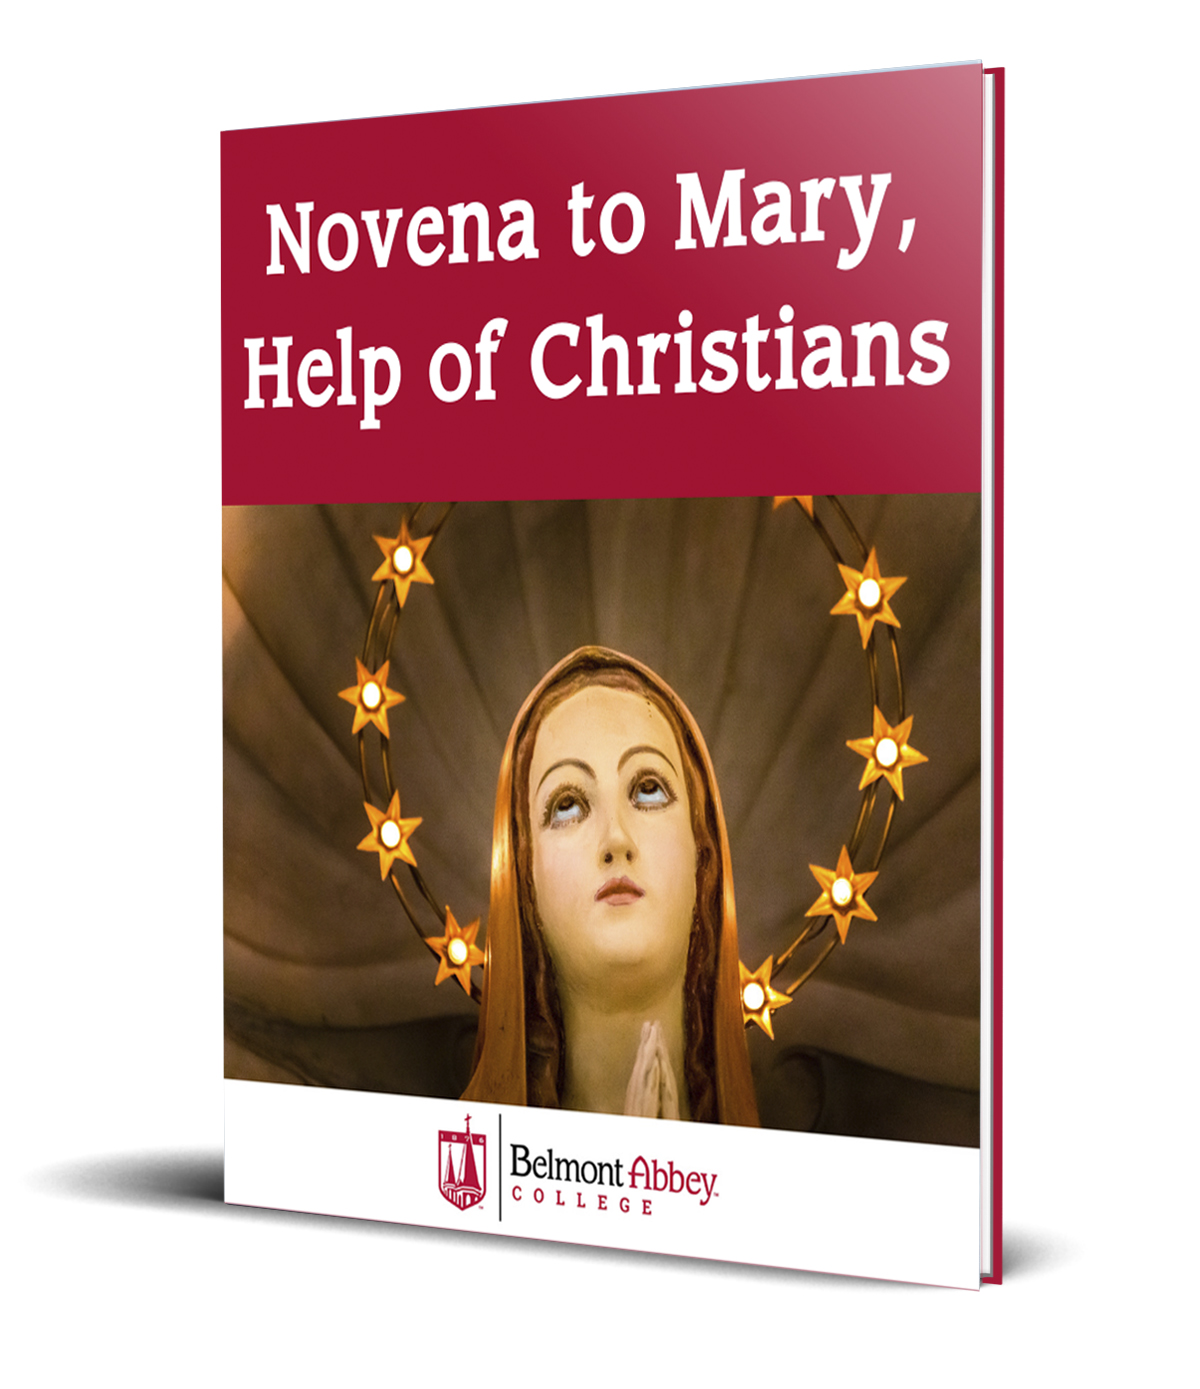 Mary Help of Christians-Landing Page – Belmont Abbey College